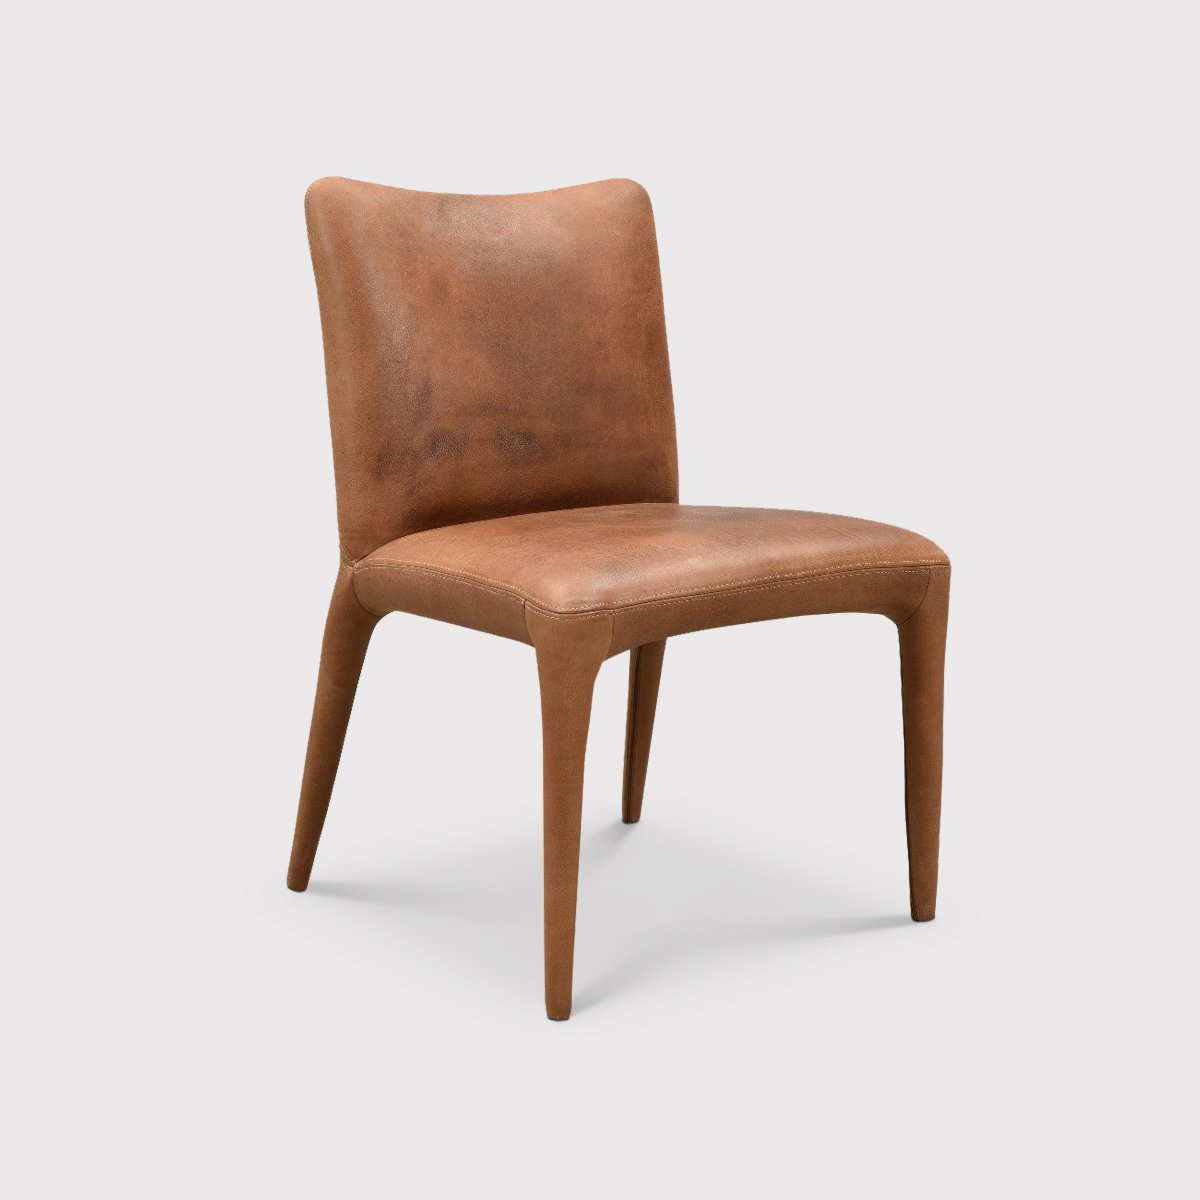 Timothy Oulton Fibi Dining Chair, Brown Leather | Barker & Stonehouse